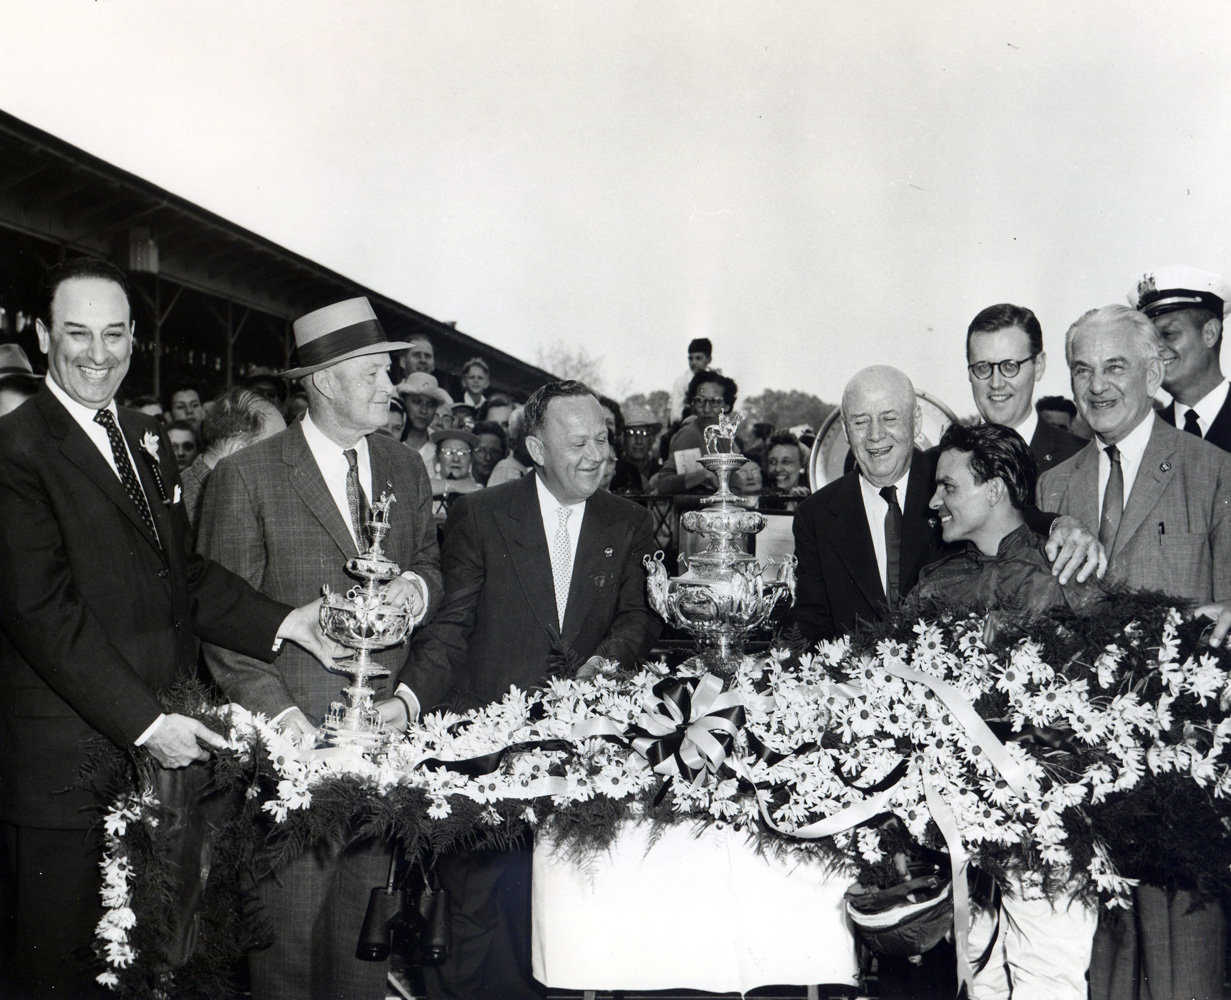 The winning connections of Tim Tam celebrating together during the trophy presentation for the 1958 Preakness Stakes (Pimlico Photo/Museum Collection)